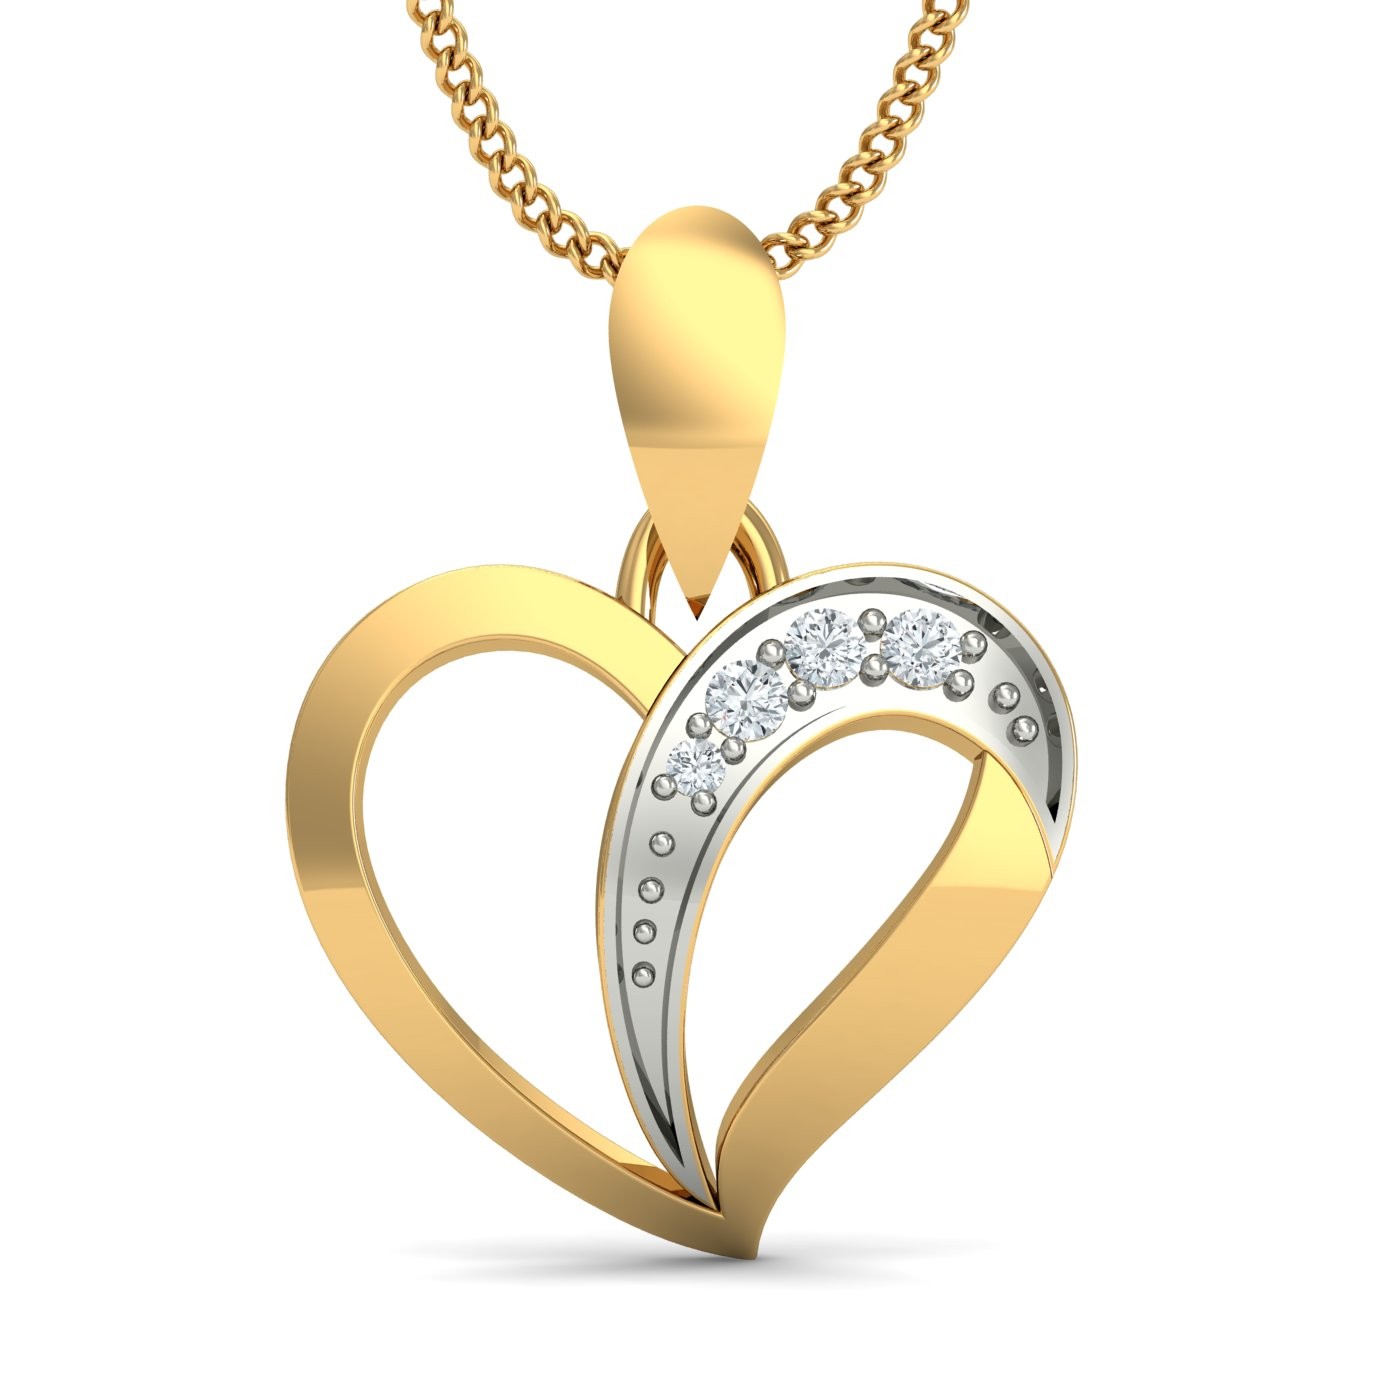 Show up your love with heart pendants